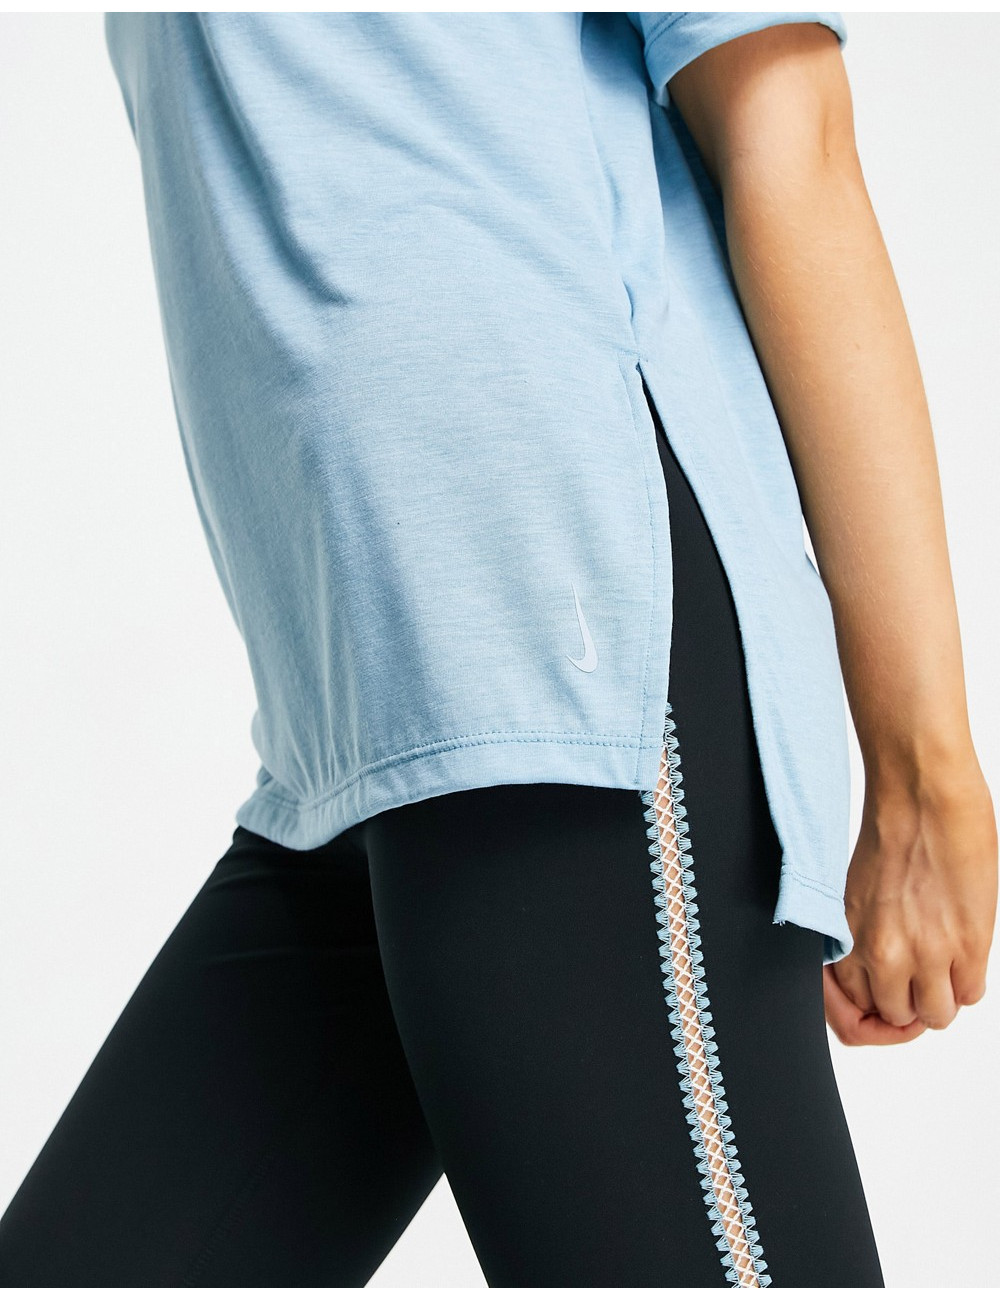 Nike Yoga dry fit layer top...